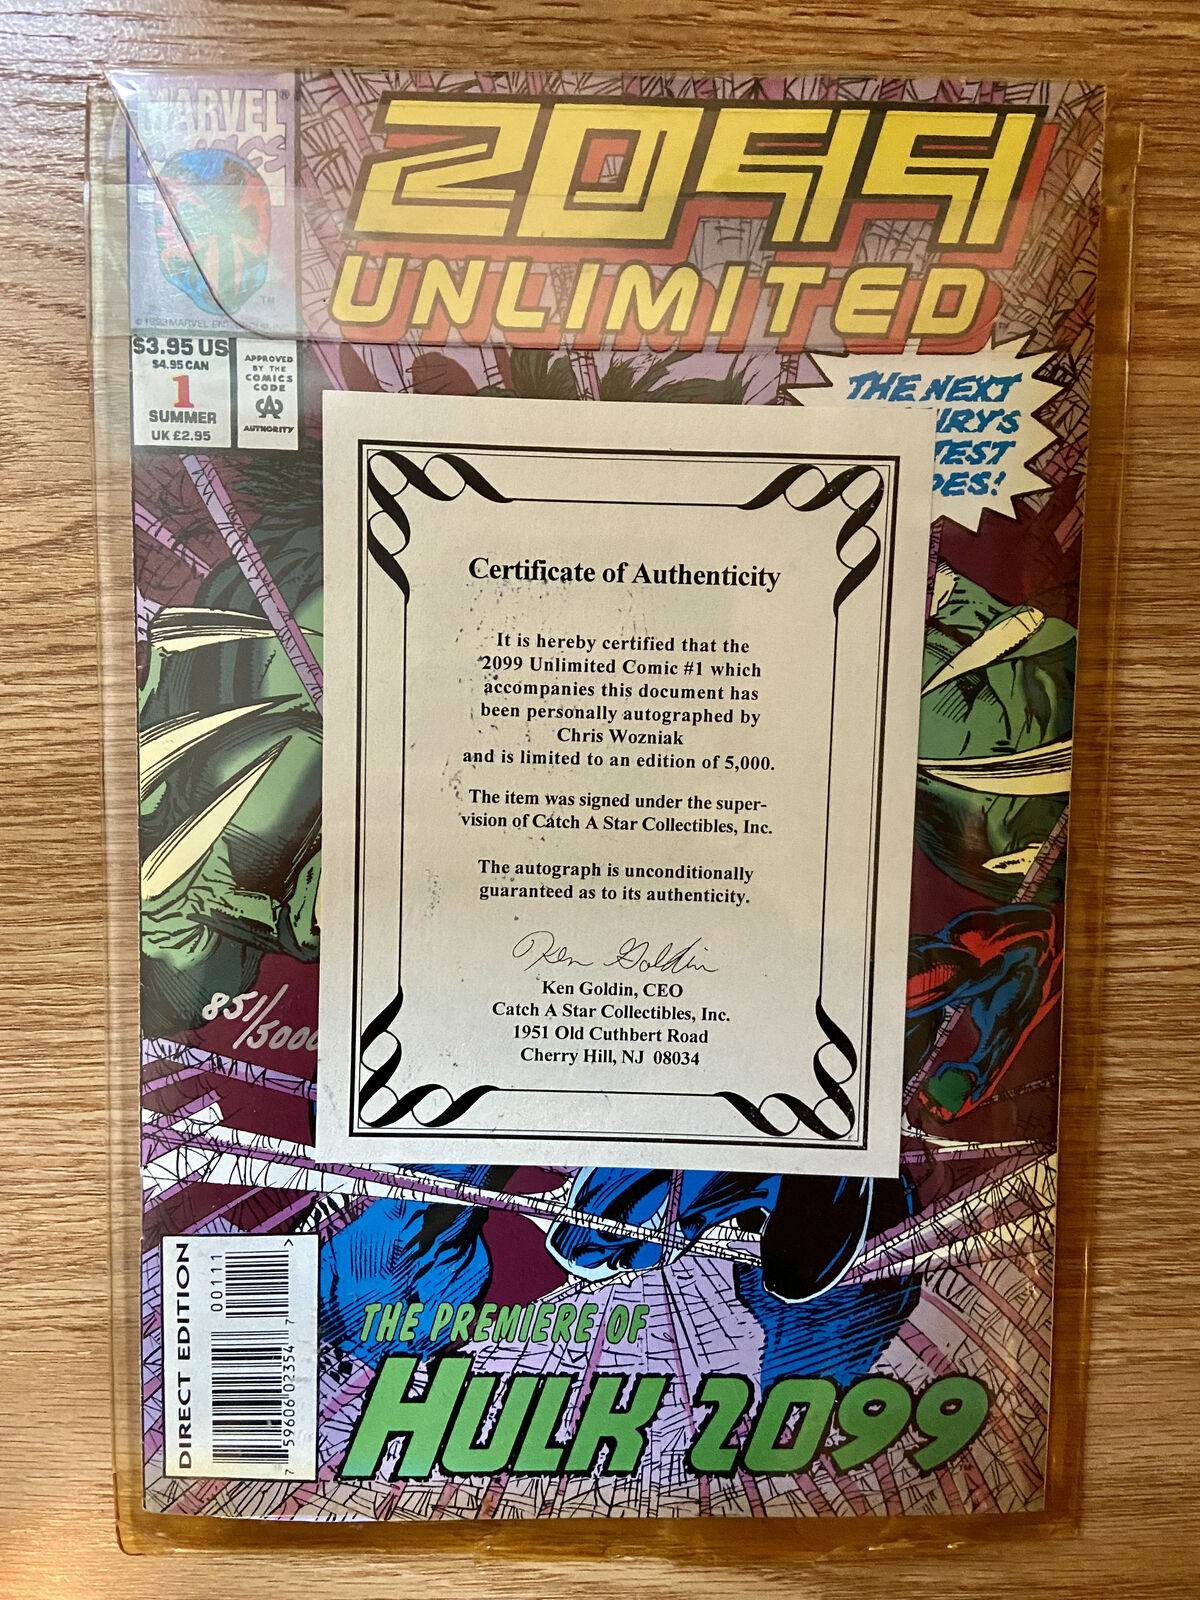 2099 Unlimited #1 featuring the Incredible Hulk Signed by Chris Wozniak